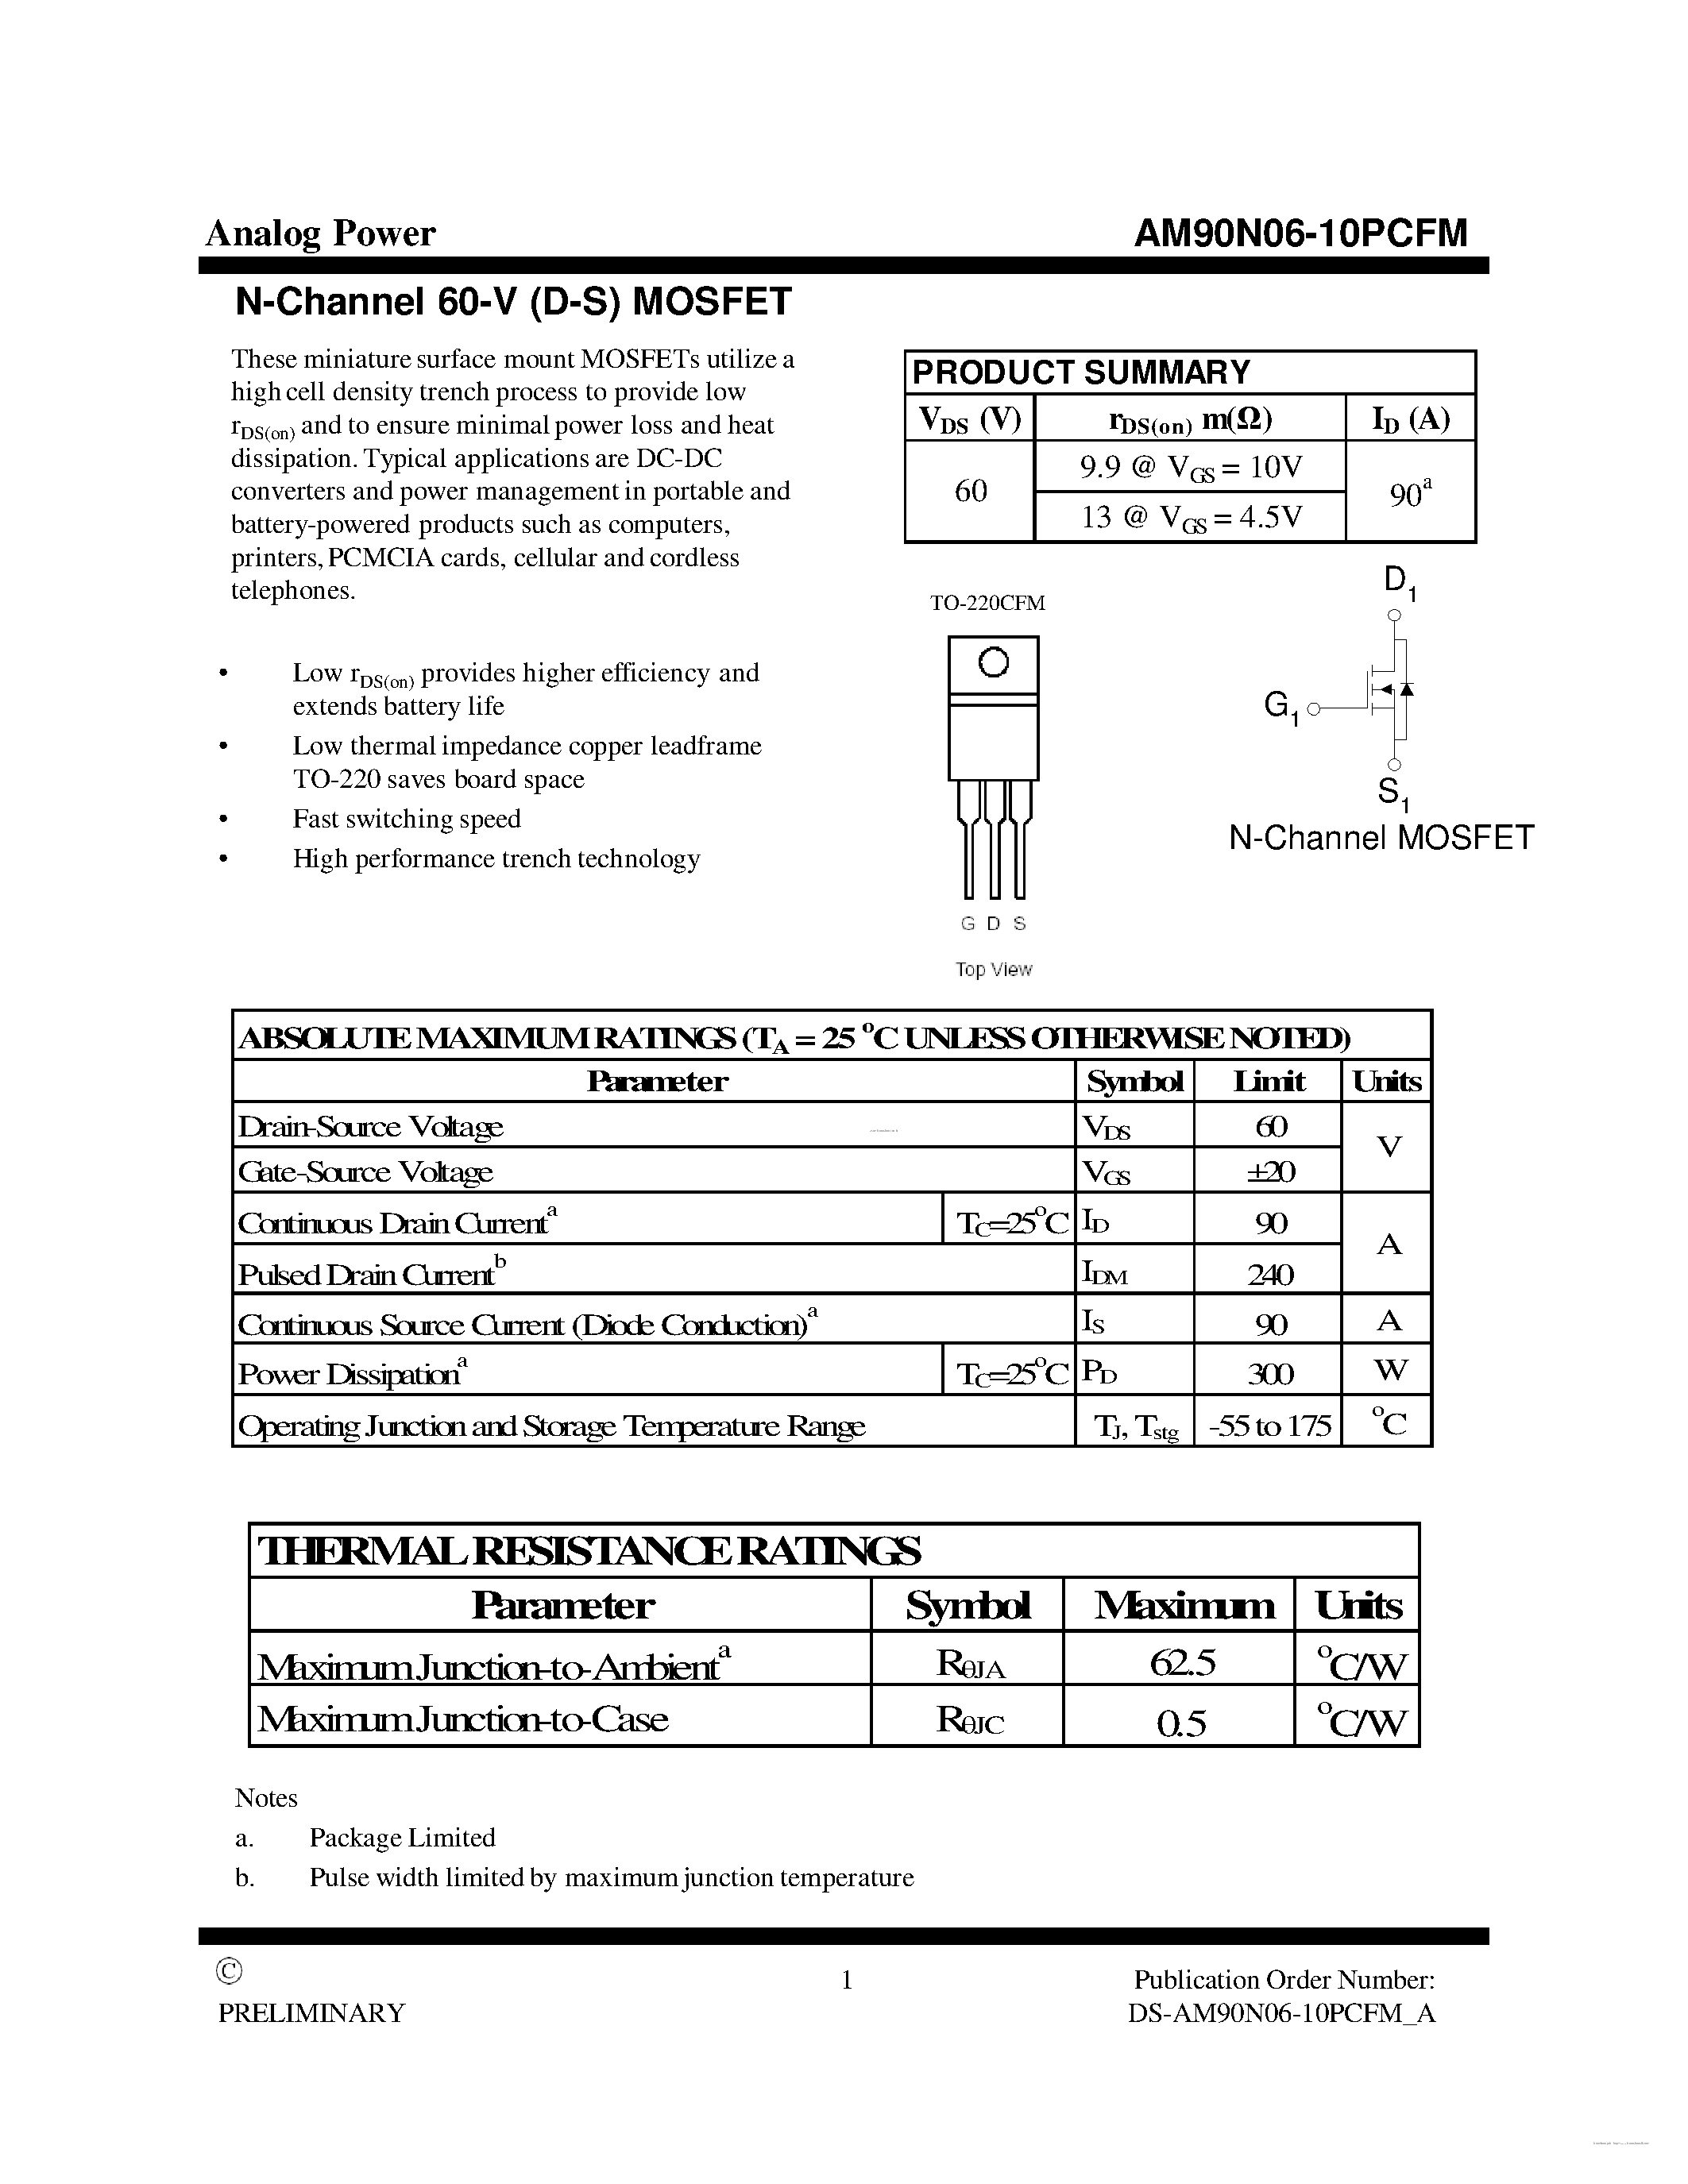 Datasheet AM90N06-10PCFM - MOSFET page 1